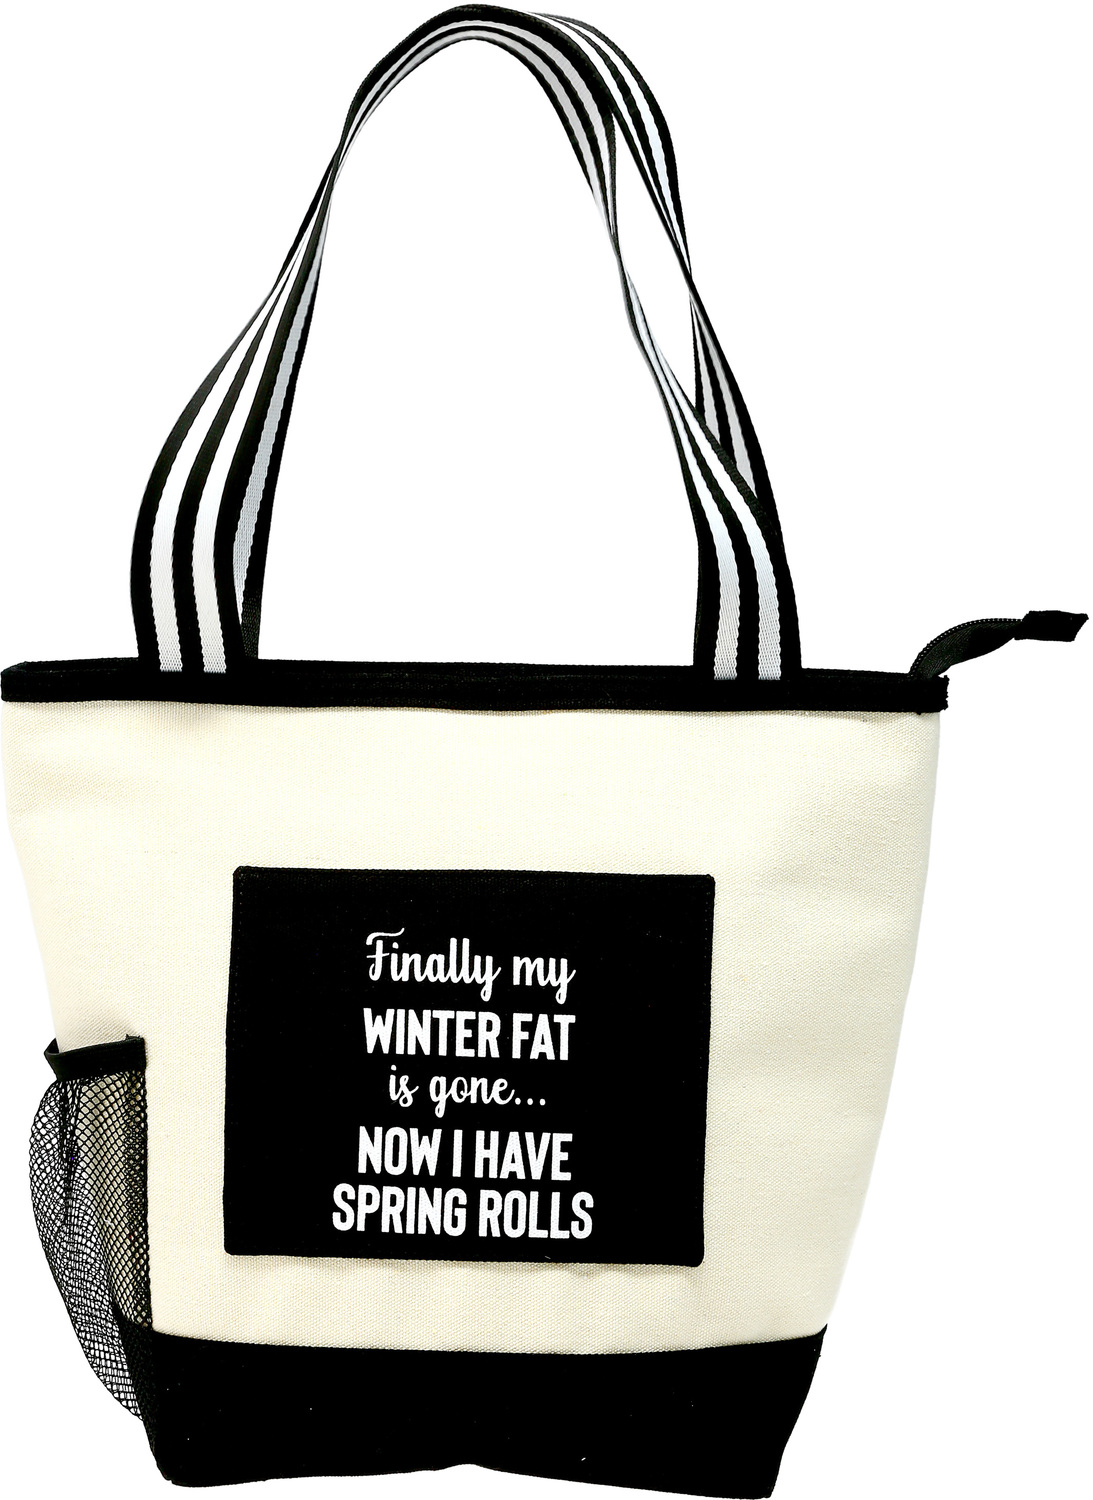 Winter Fat by Check Me Out - Winter Fat - Insulated Canvas Lunch Tote